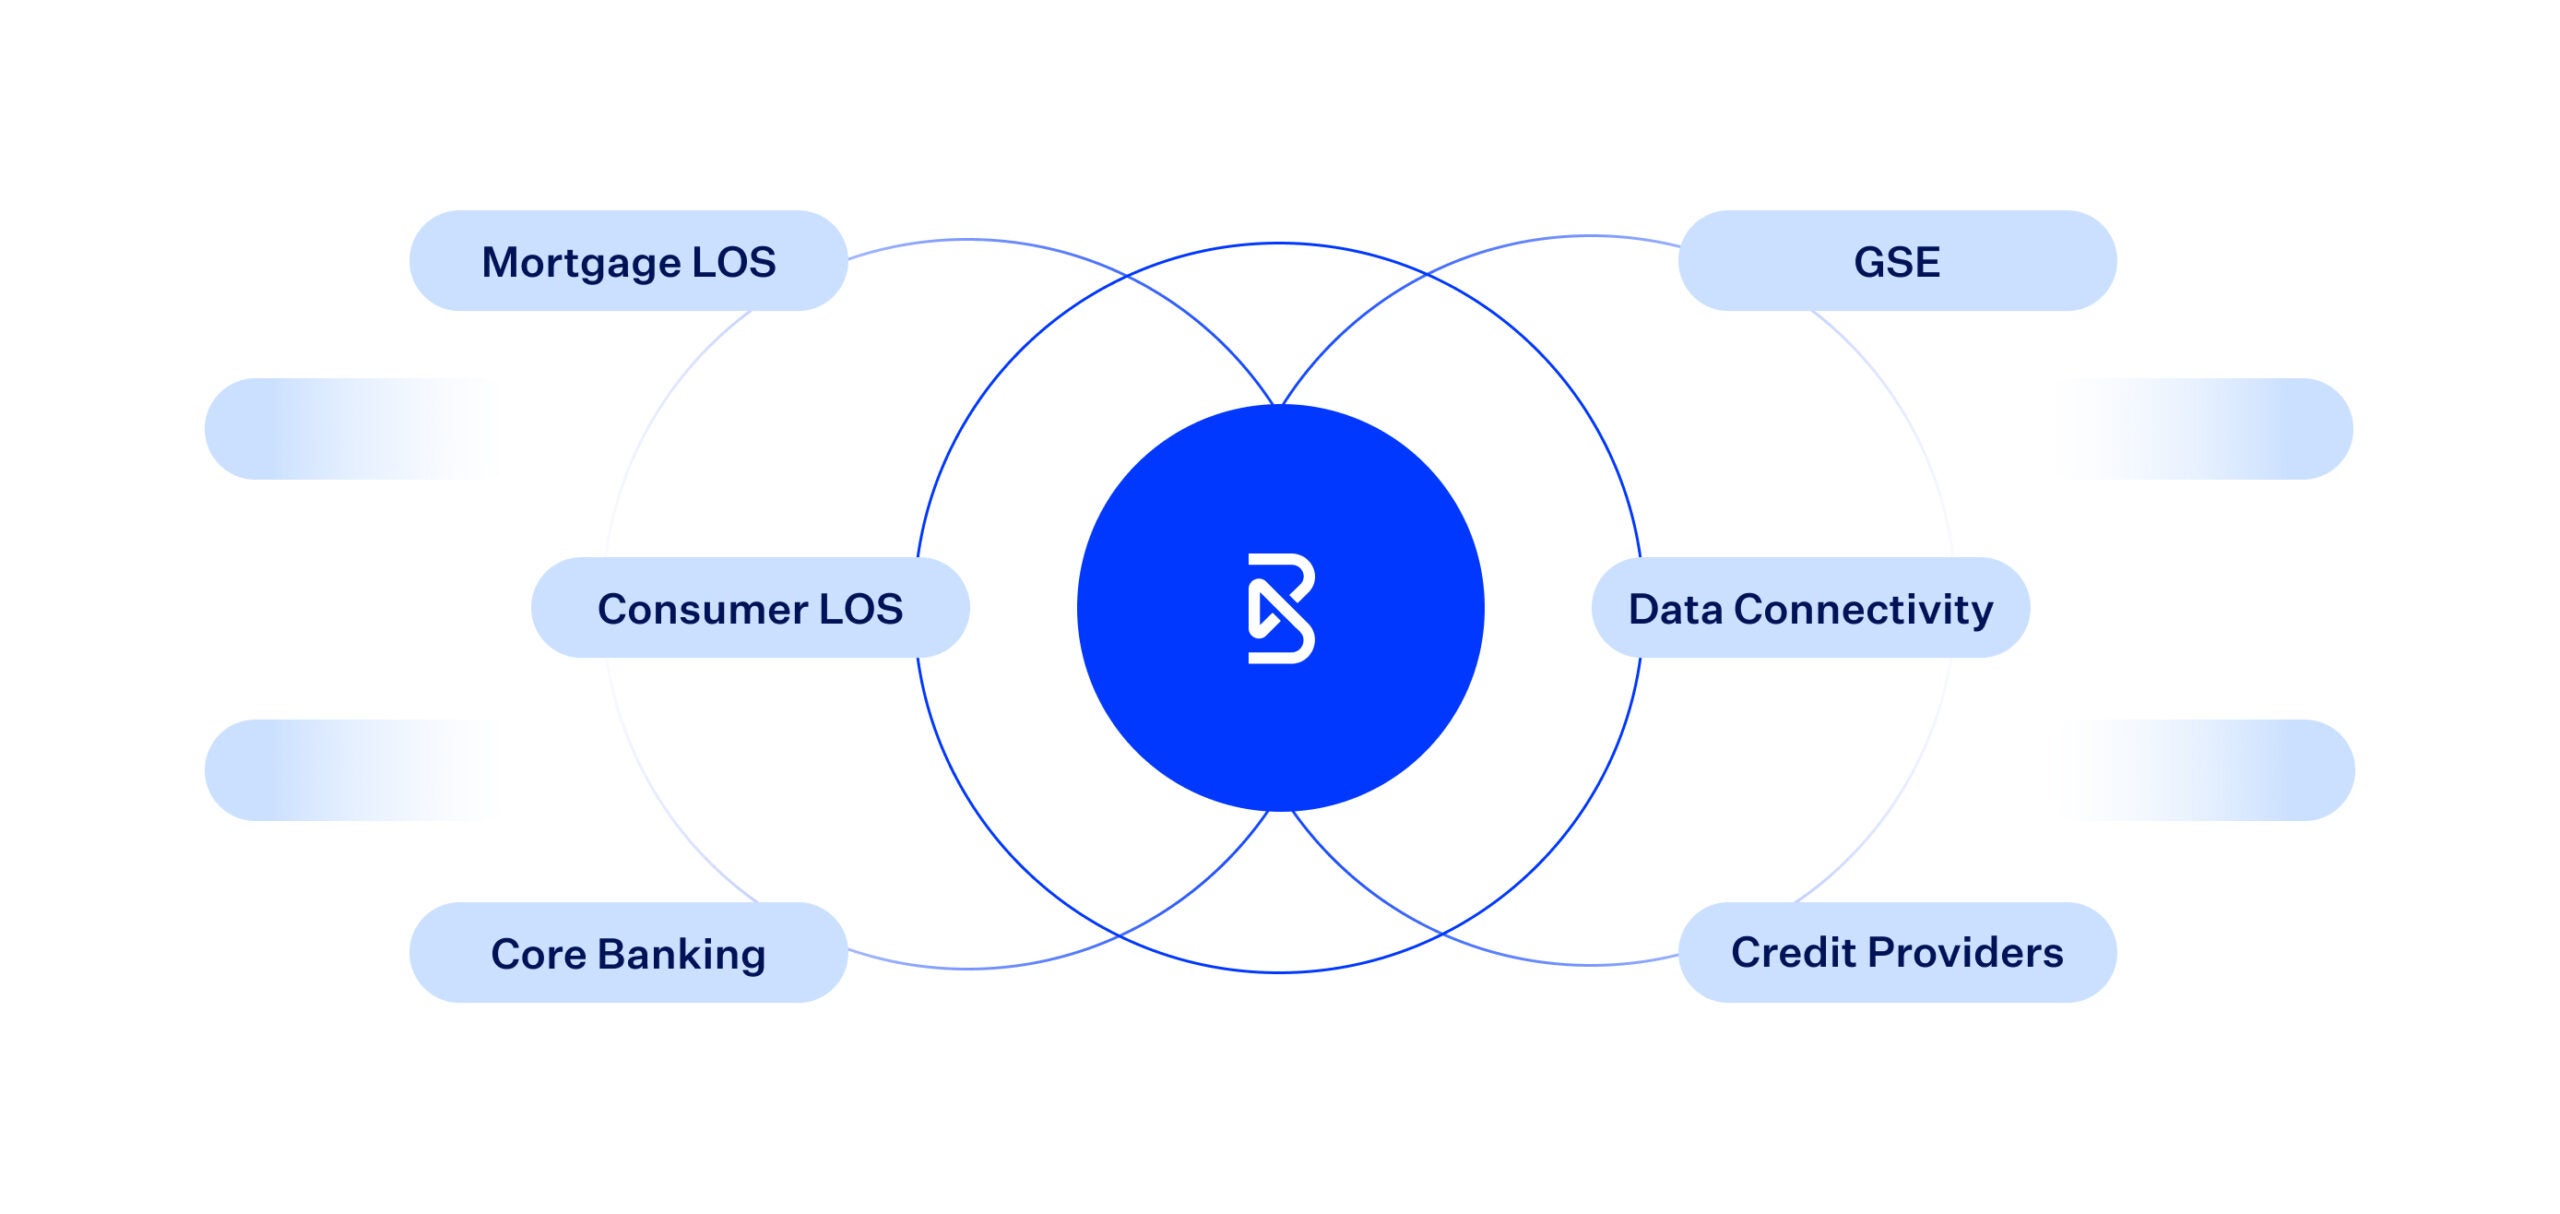 Blend logo in blue circle interconnected with Mortgage LOS, Consumer LOS, Core Banking, GSE, Data Connectivity, and Credit Providers